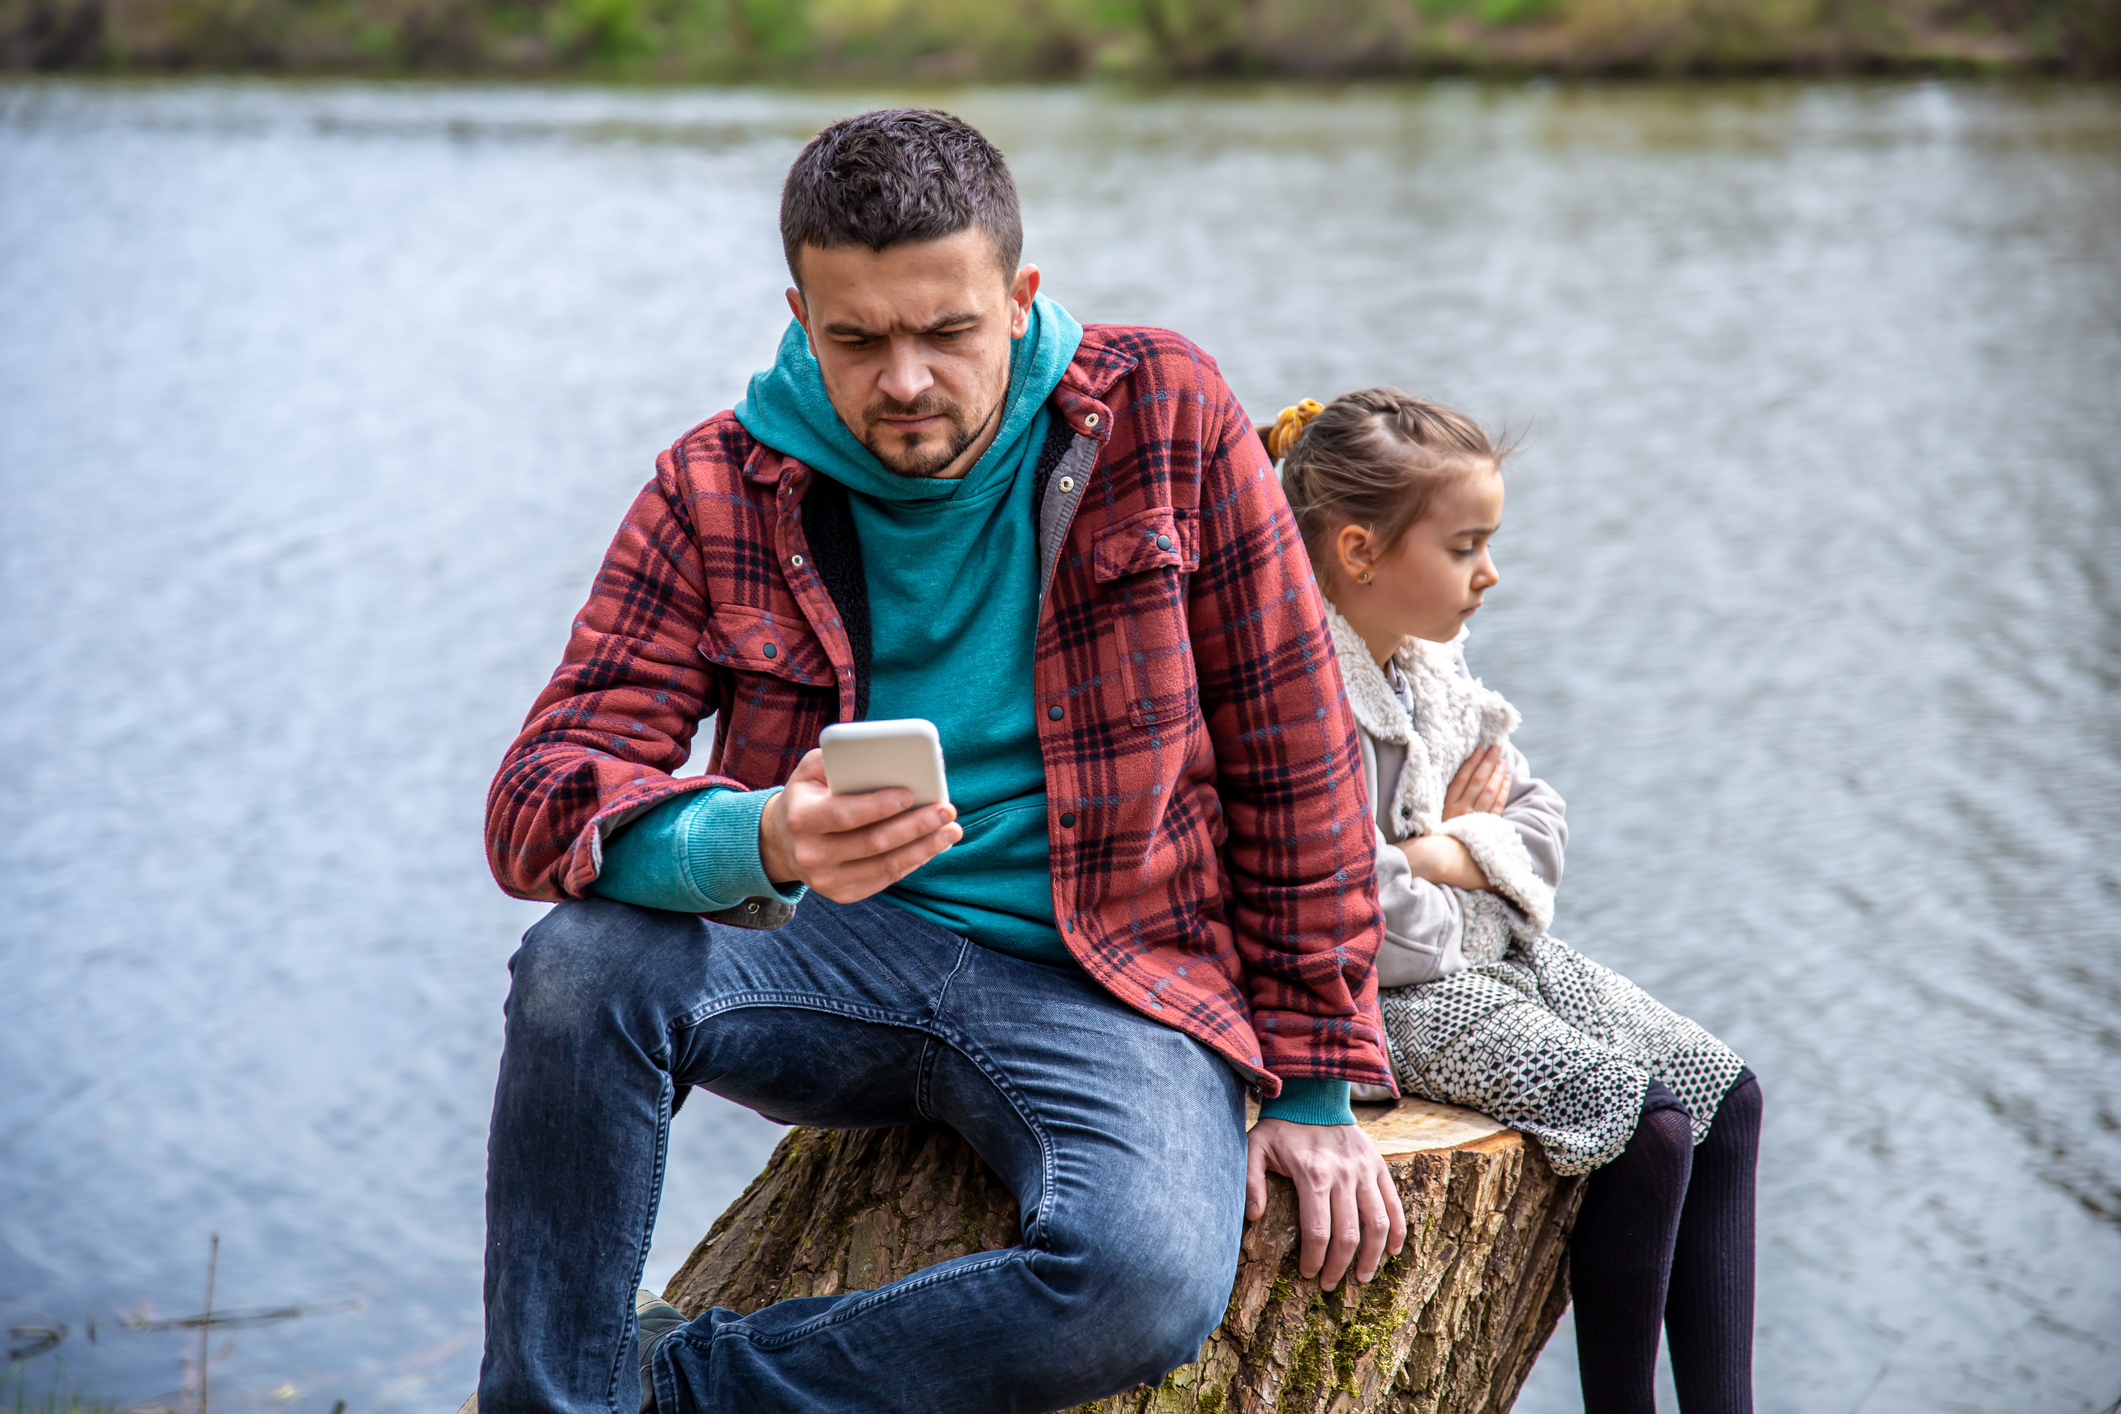 Man looking at phone with young girl beside him sitting on tree stump outdoors